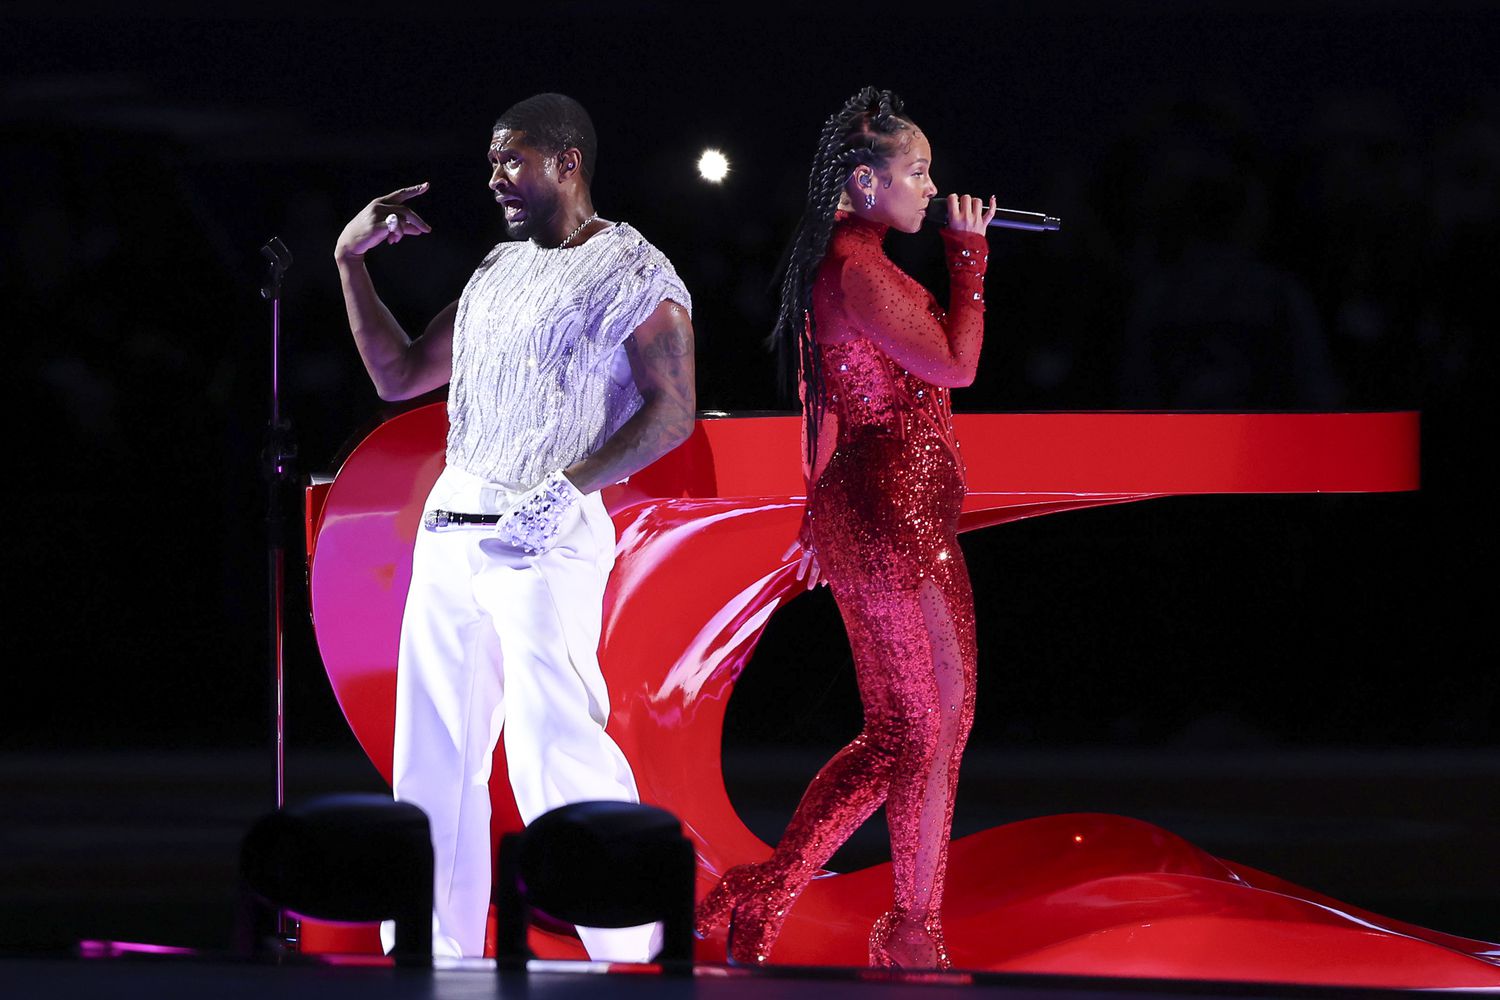 LAS VEGAS, NEVADA - FEBRUARY 11: (L-R) Usher and Alicia Keys perform onstage during the Apple Music Super Bowl LVIII Halftime Show at Allegiant Stadium on February 11, 2024 in Las Vegas, Nevada. (Photo by Steph Chambers/Getty Images)